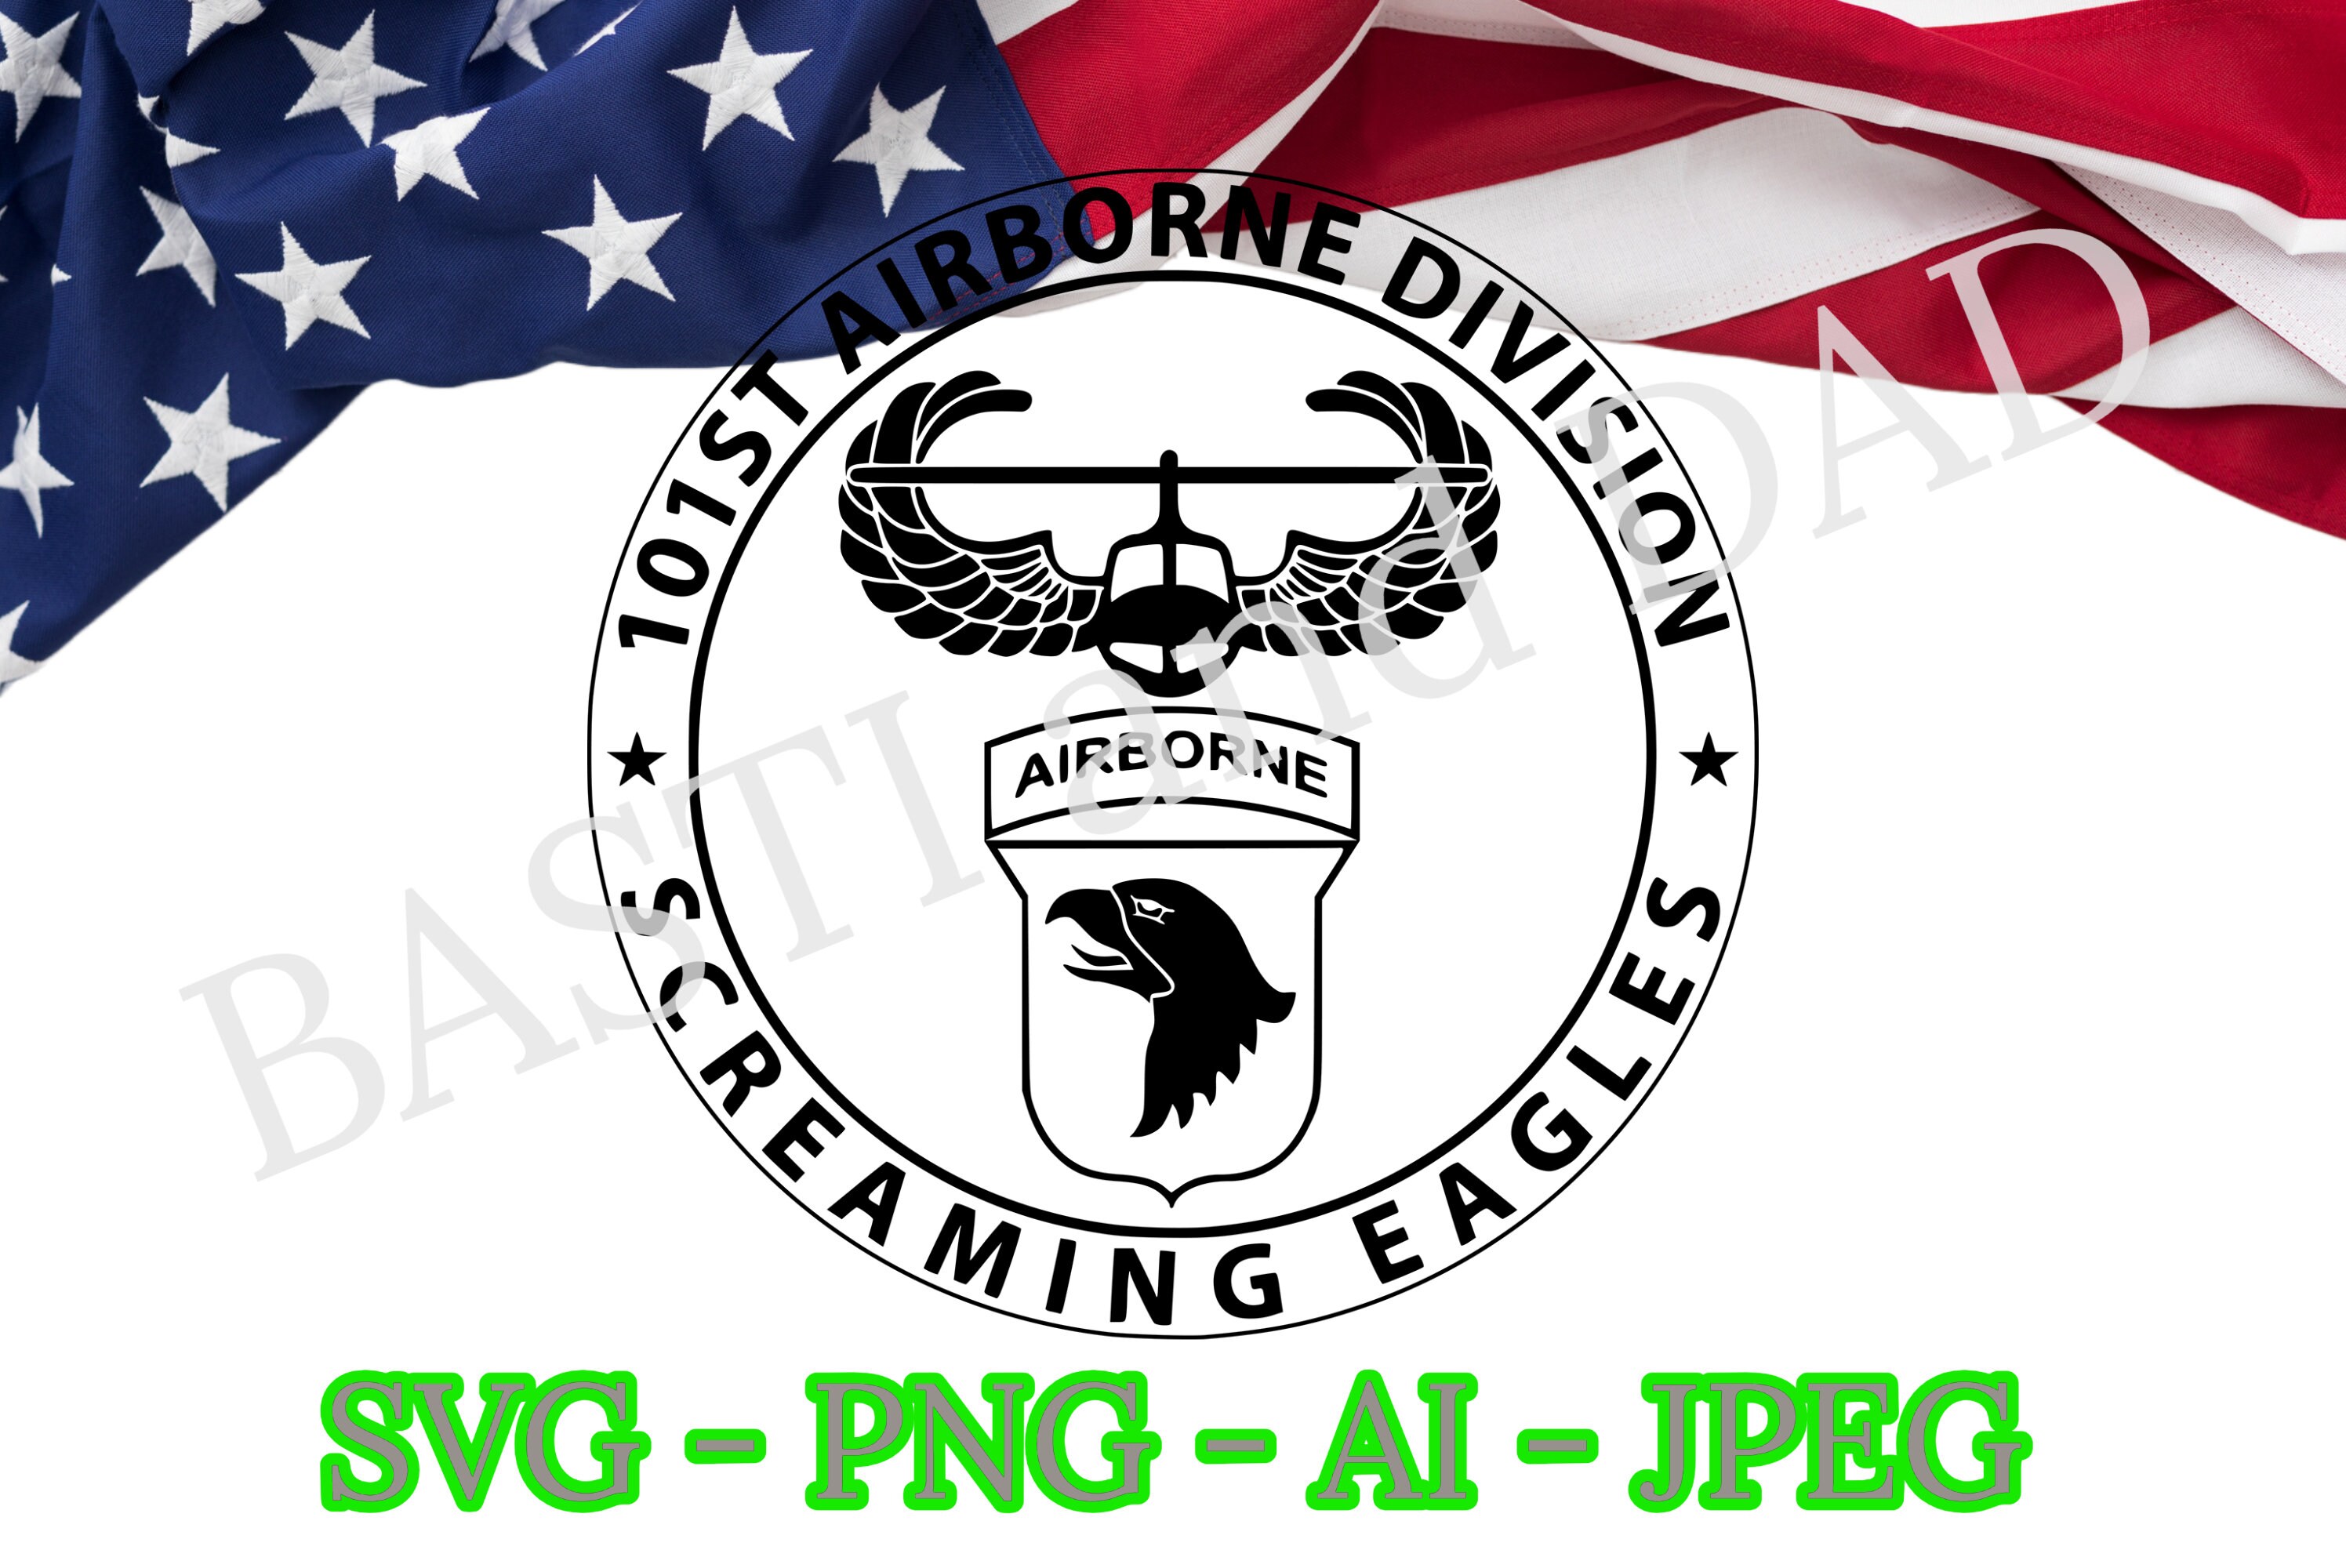 Us Army 101st Airborne Division Screaming Eagles Svg Png Ai And Jpeg